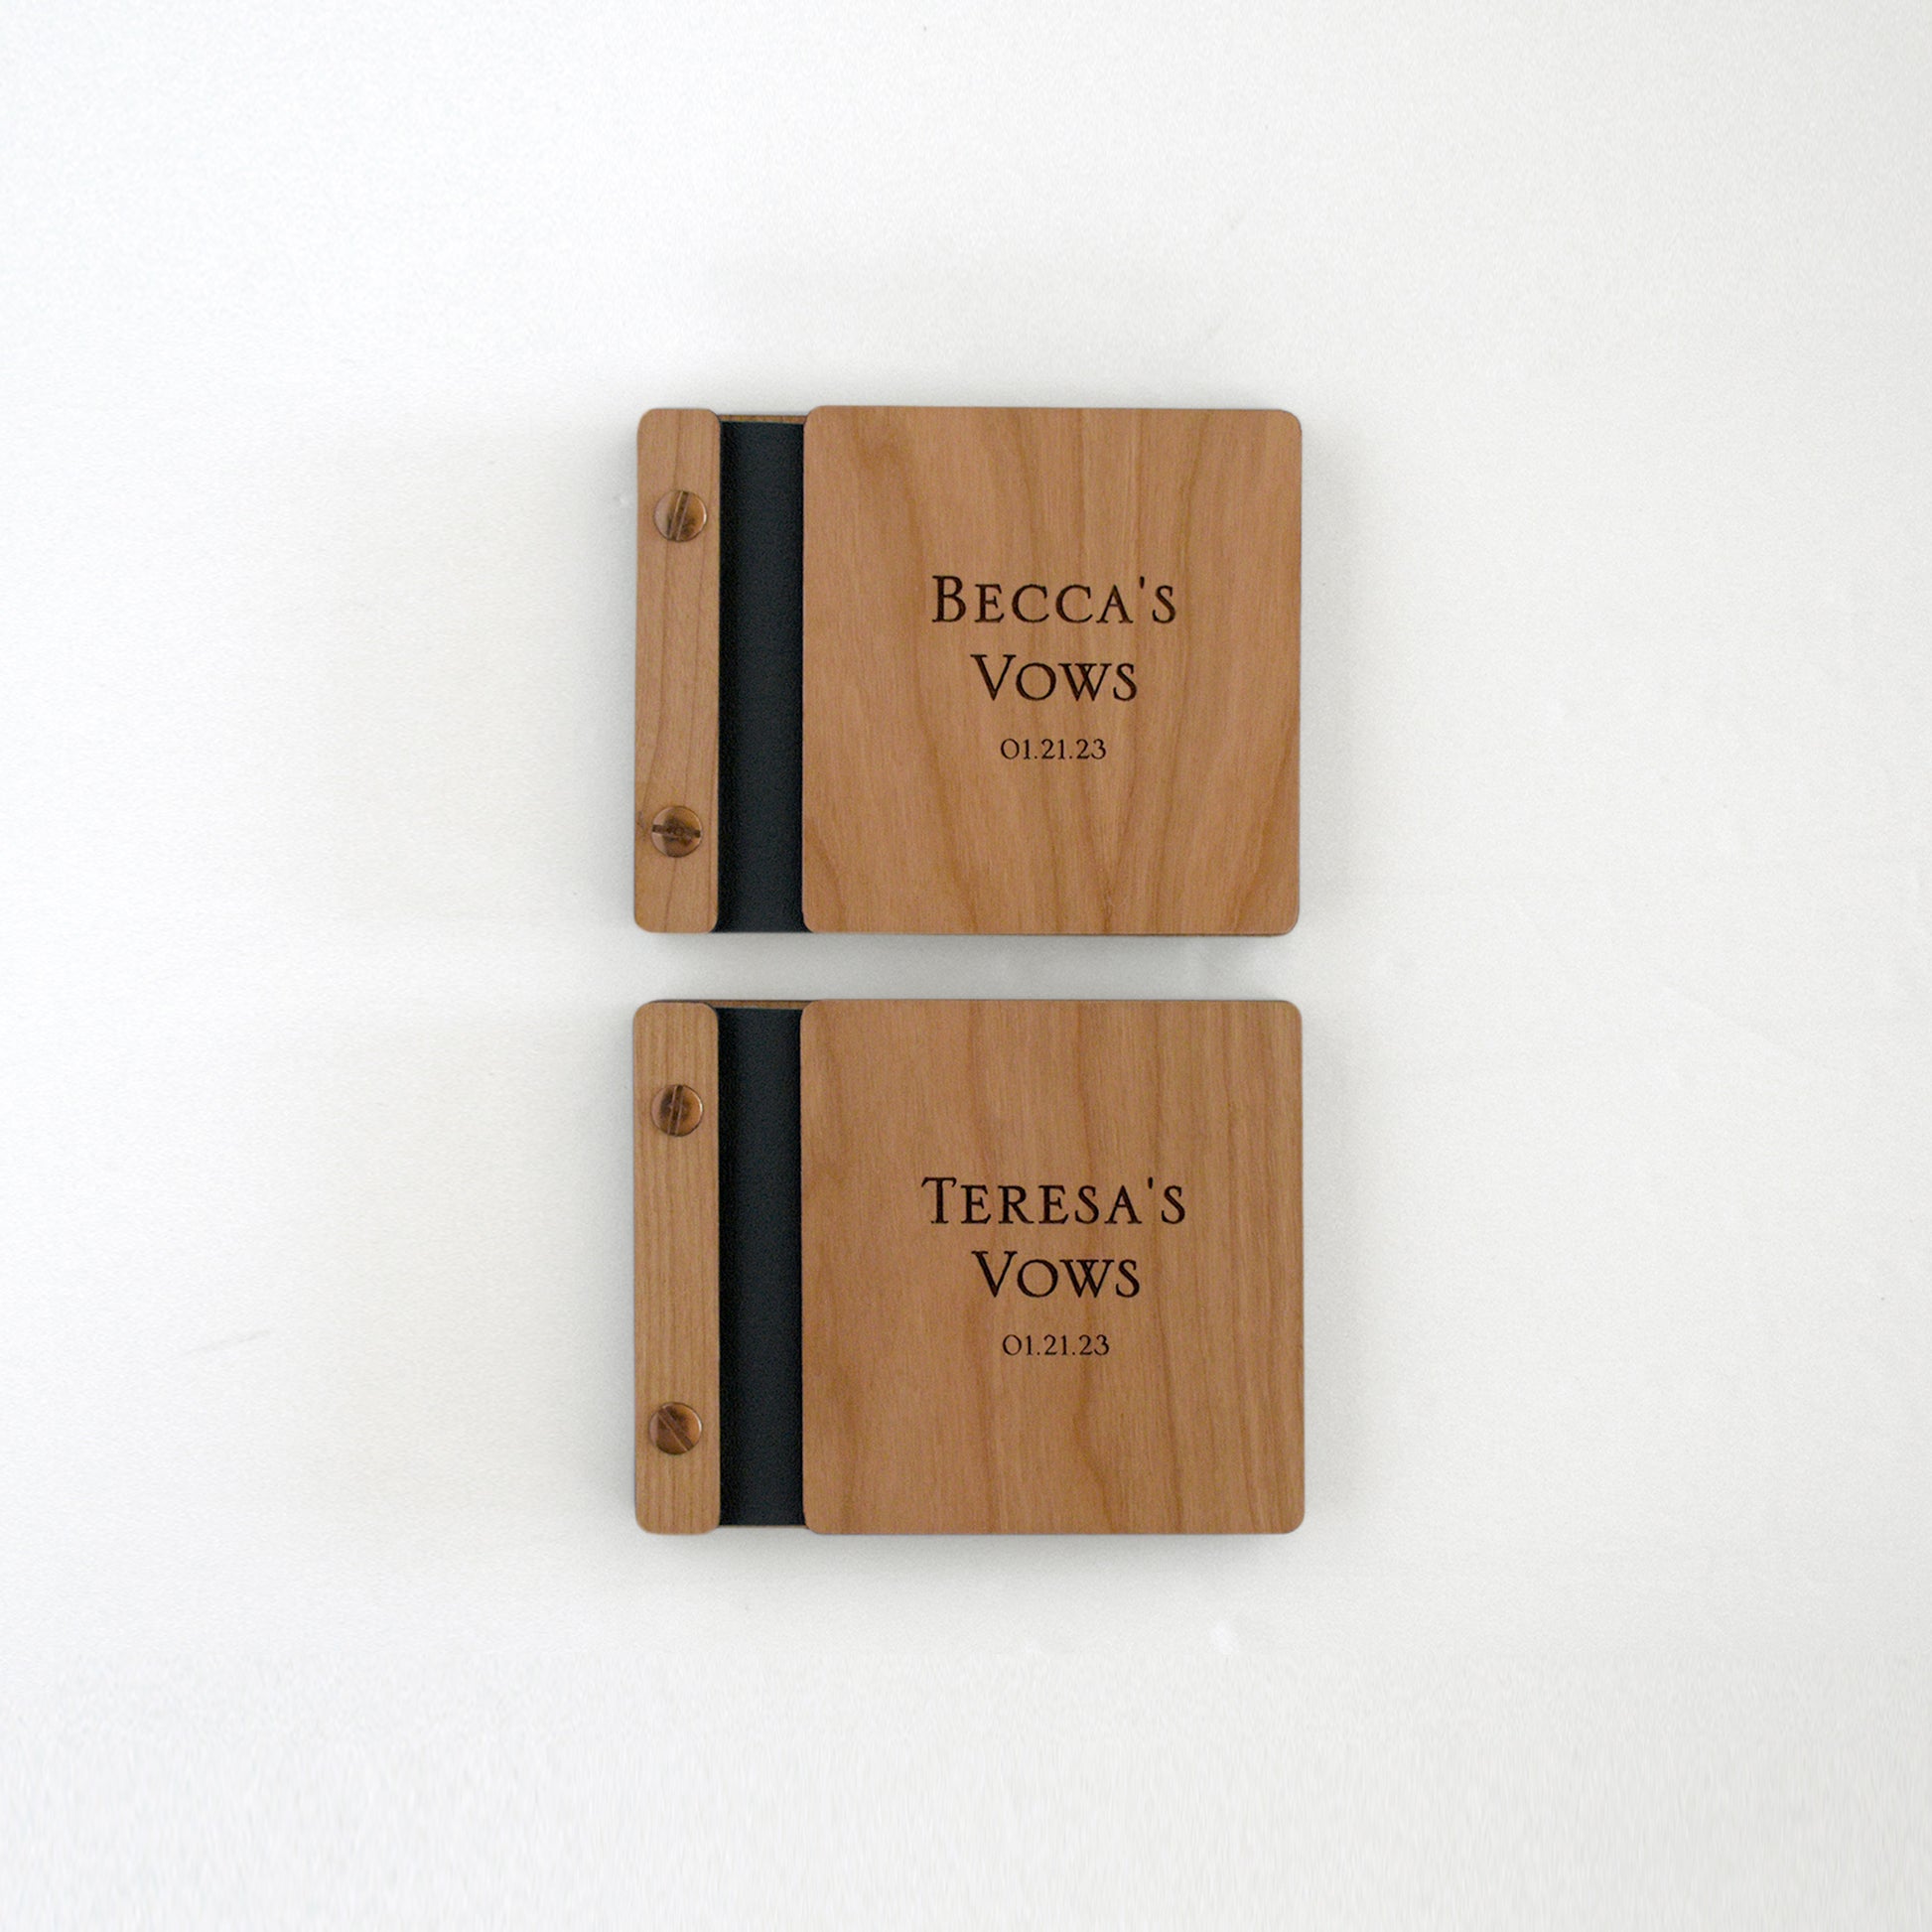 Two vow books sit on a table next to one another. Made of maple wood, aqua binding, and silver hardware, they read Becca's Vows and Teresa's Vows.